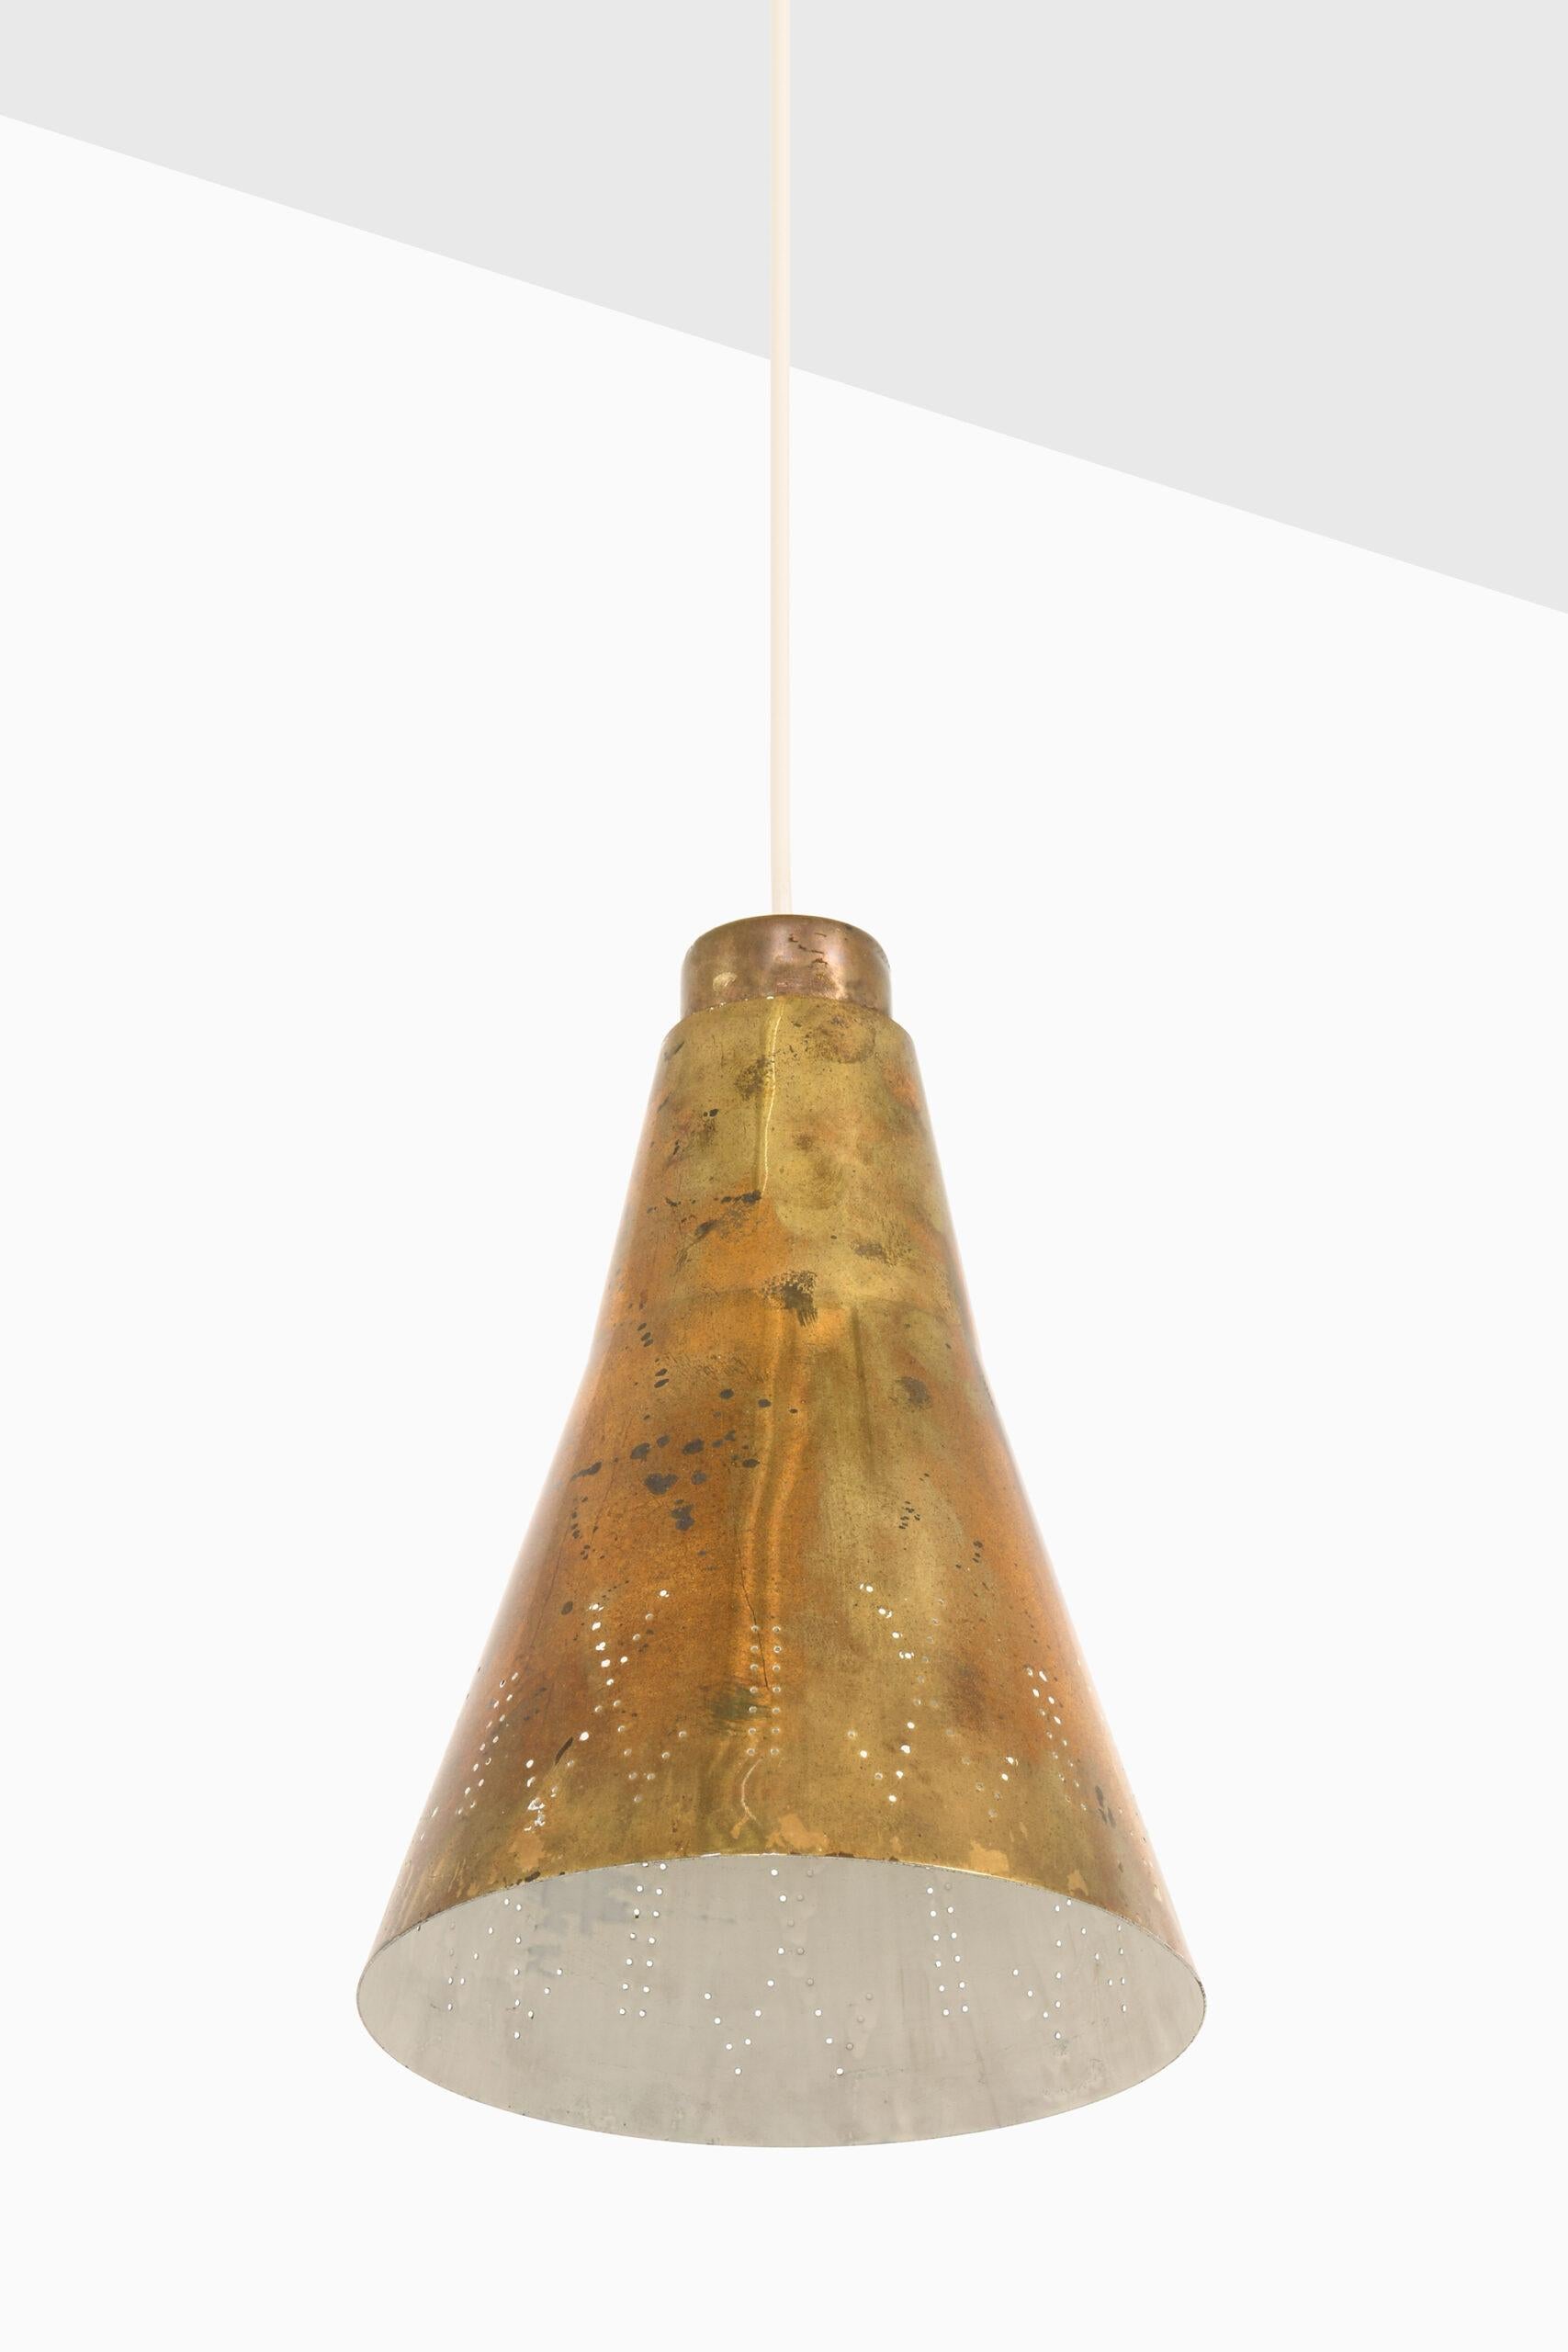 Scandinavian Modern Paavo Tynell Ceiling Lamps Model 1995 Produced by Idman in Finland For Sale